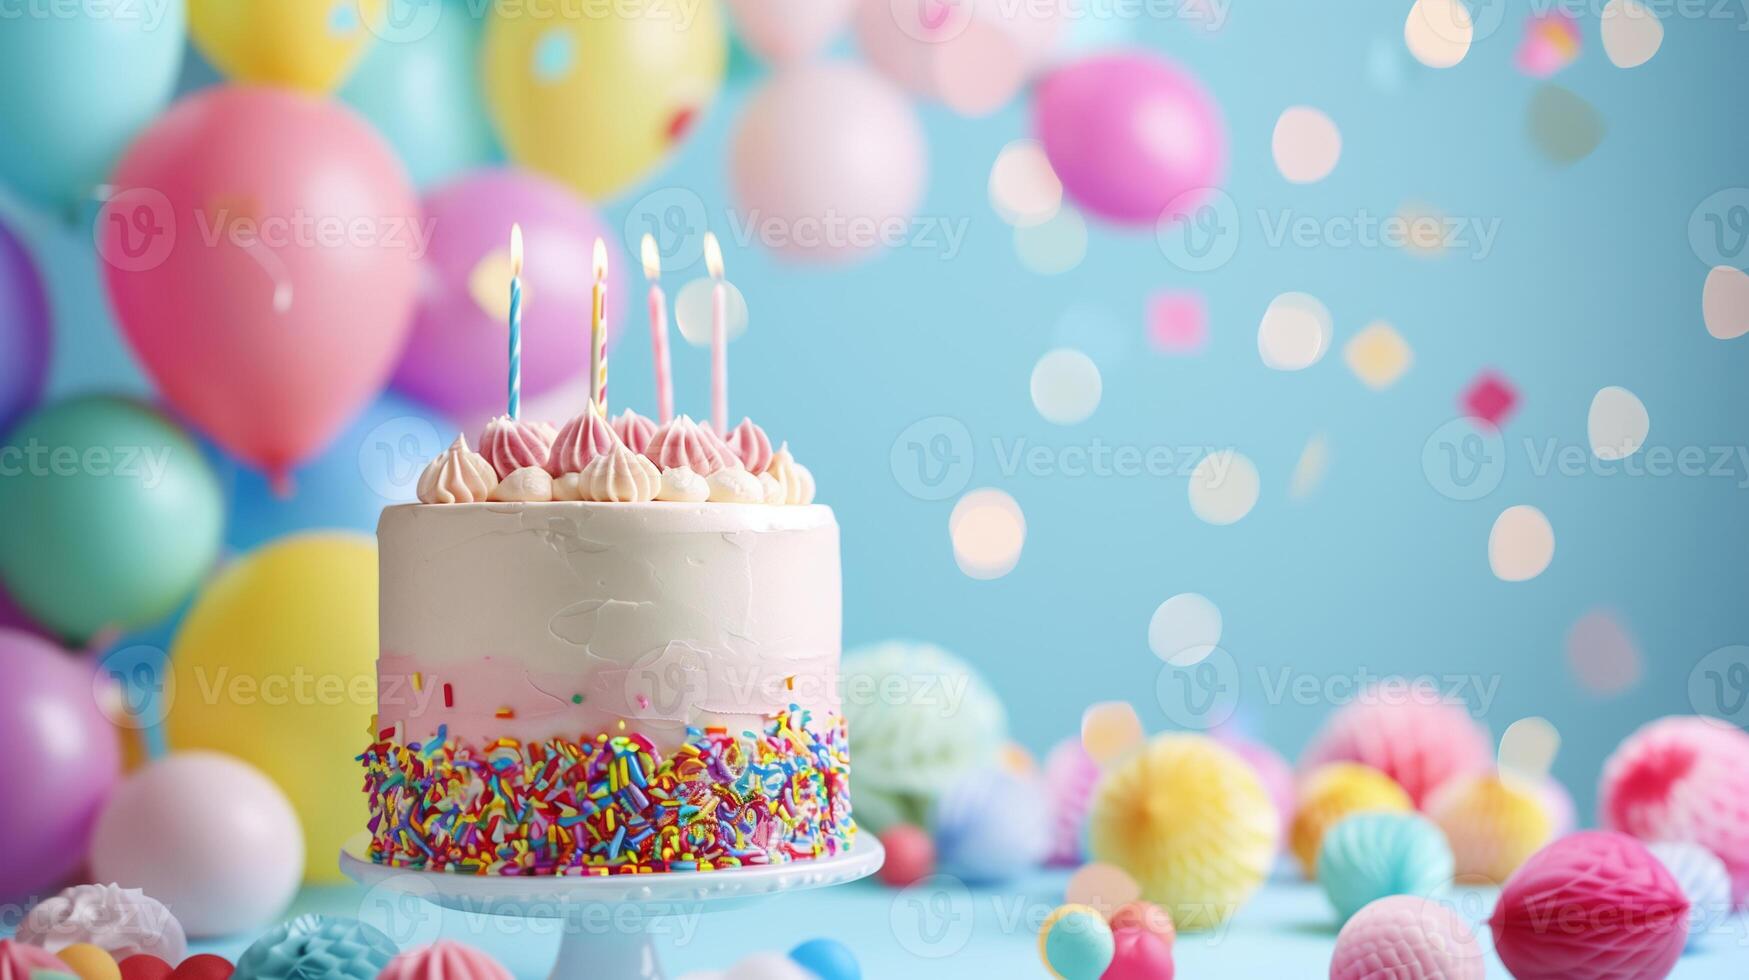 AI generated Banner Vibrant birthday cake with candles, colorful balloons, and party decorations for festive celebration background photo